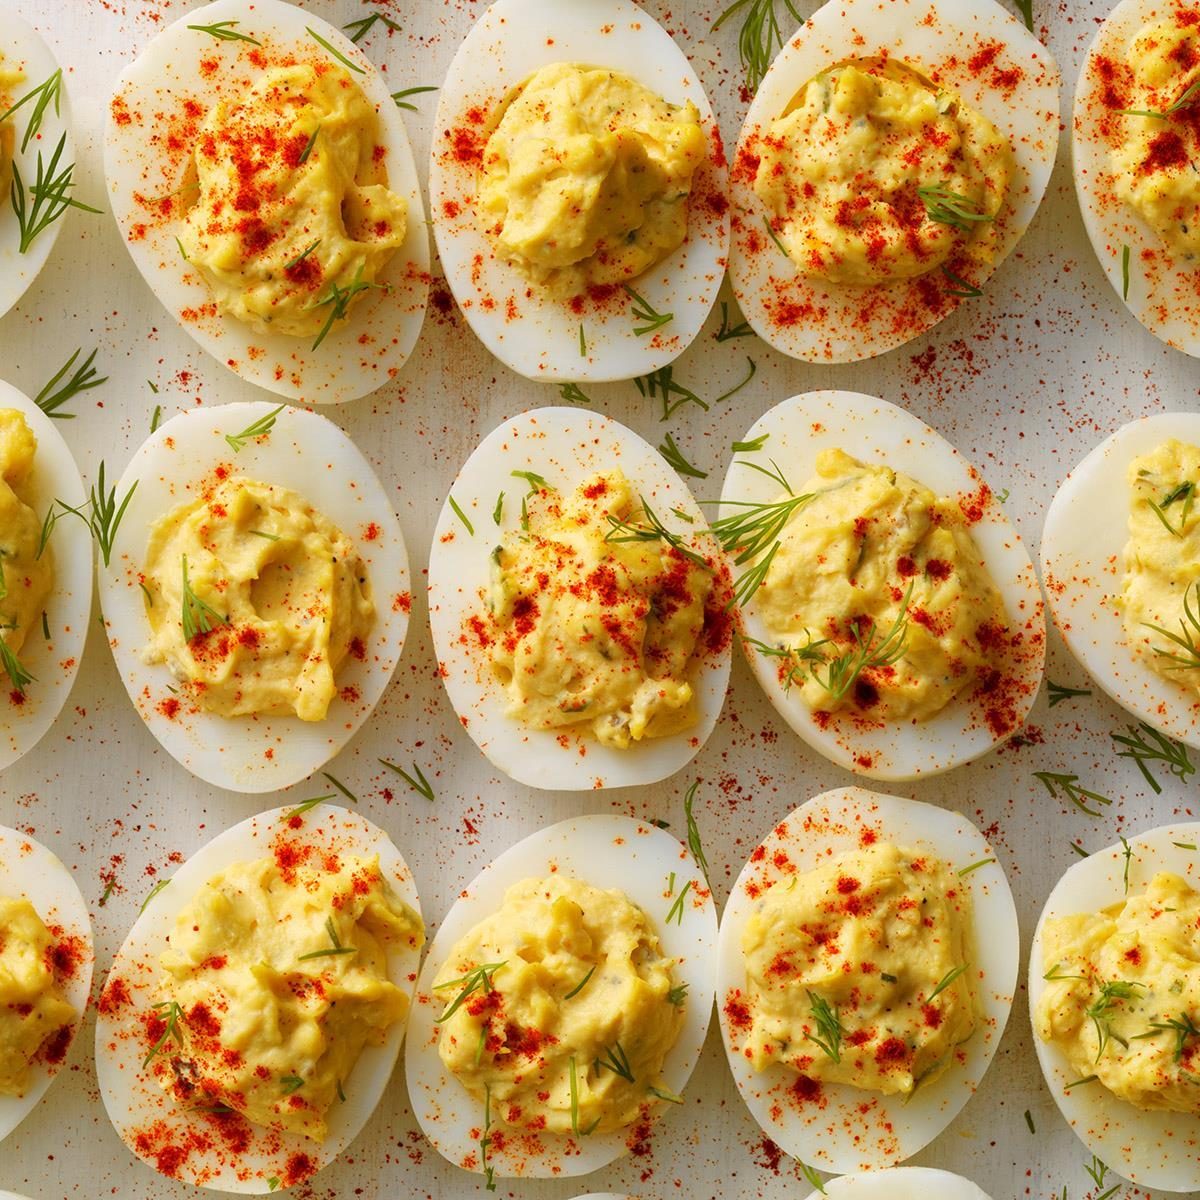 How to Boil Eggs So They Come Out Perfectly Every Time